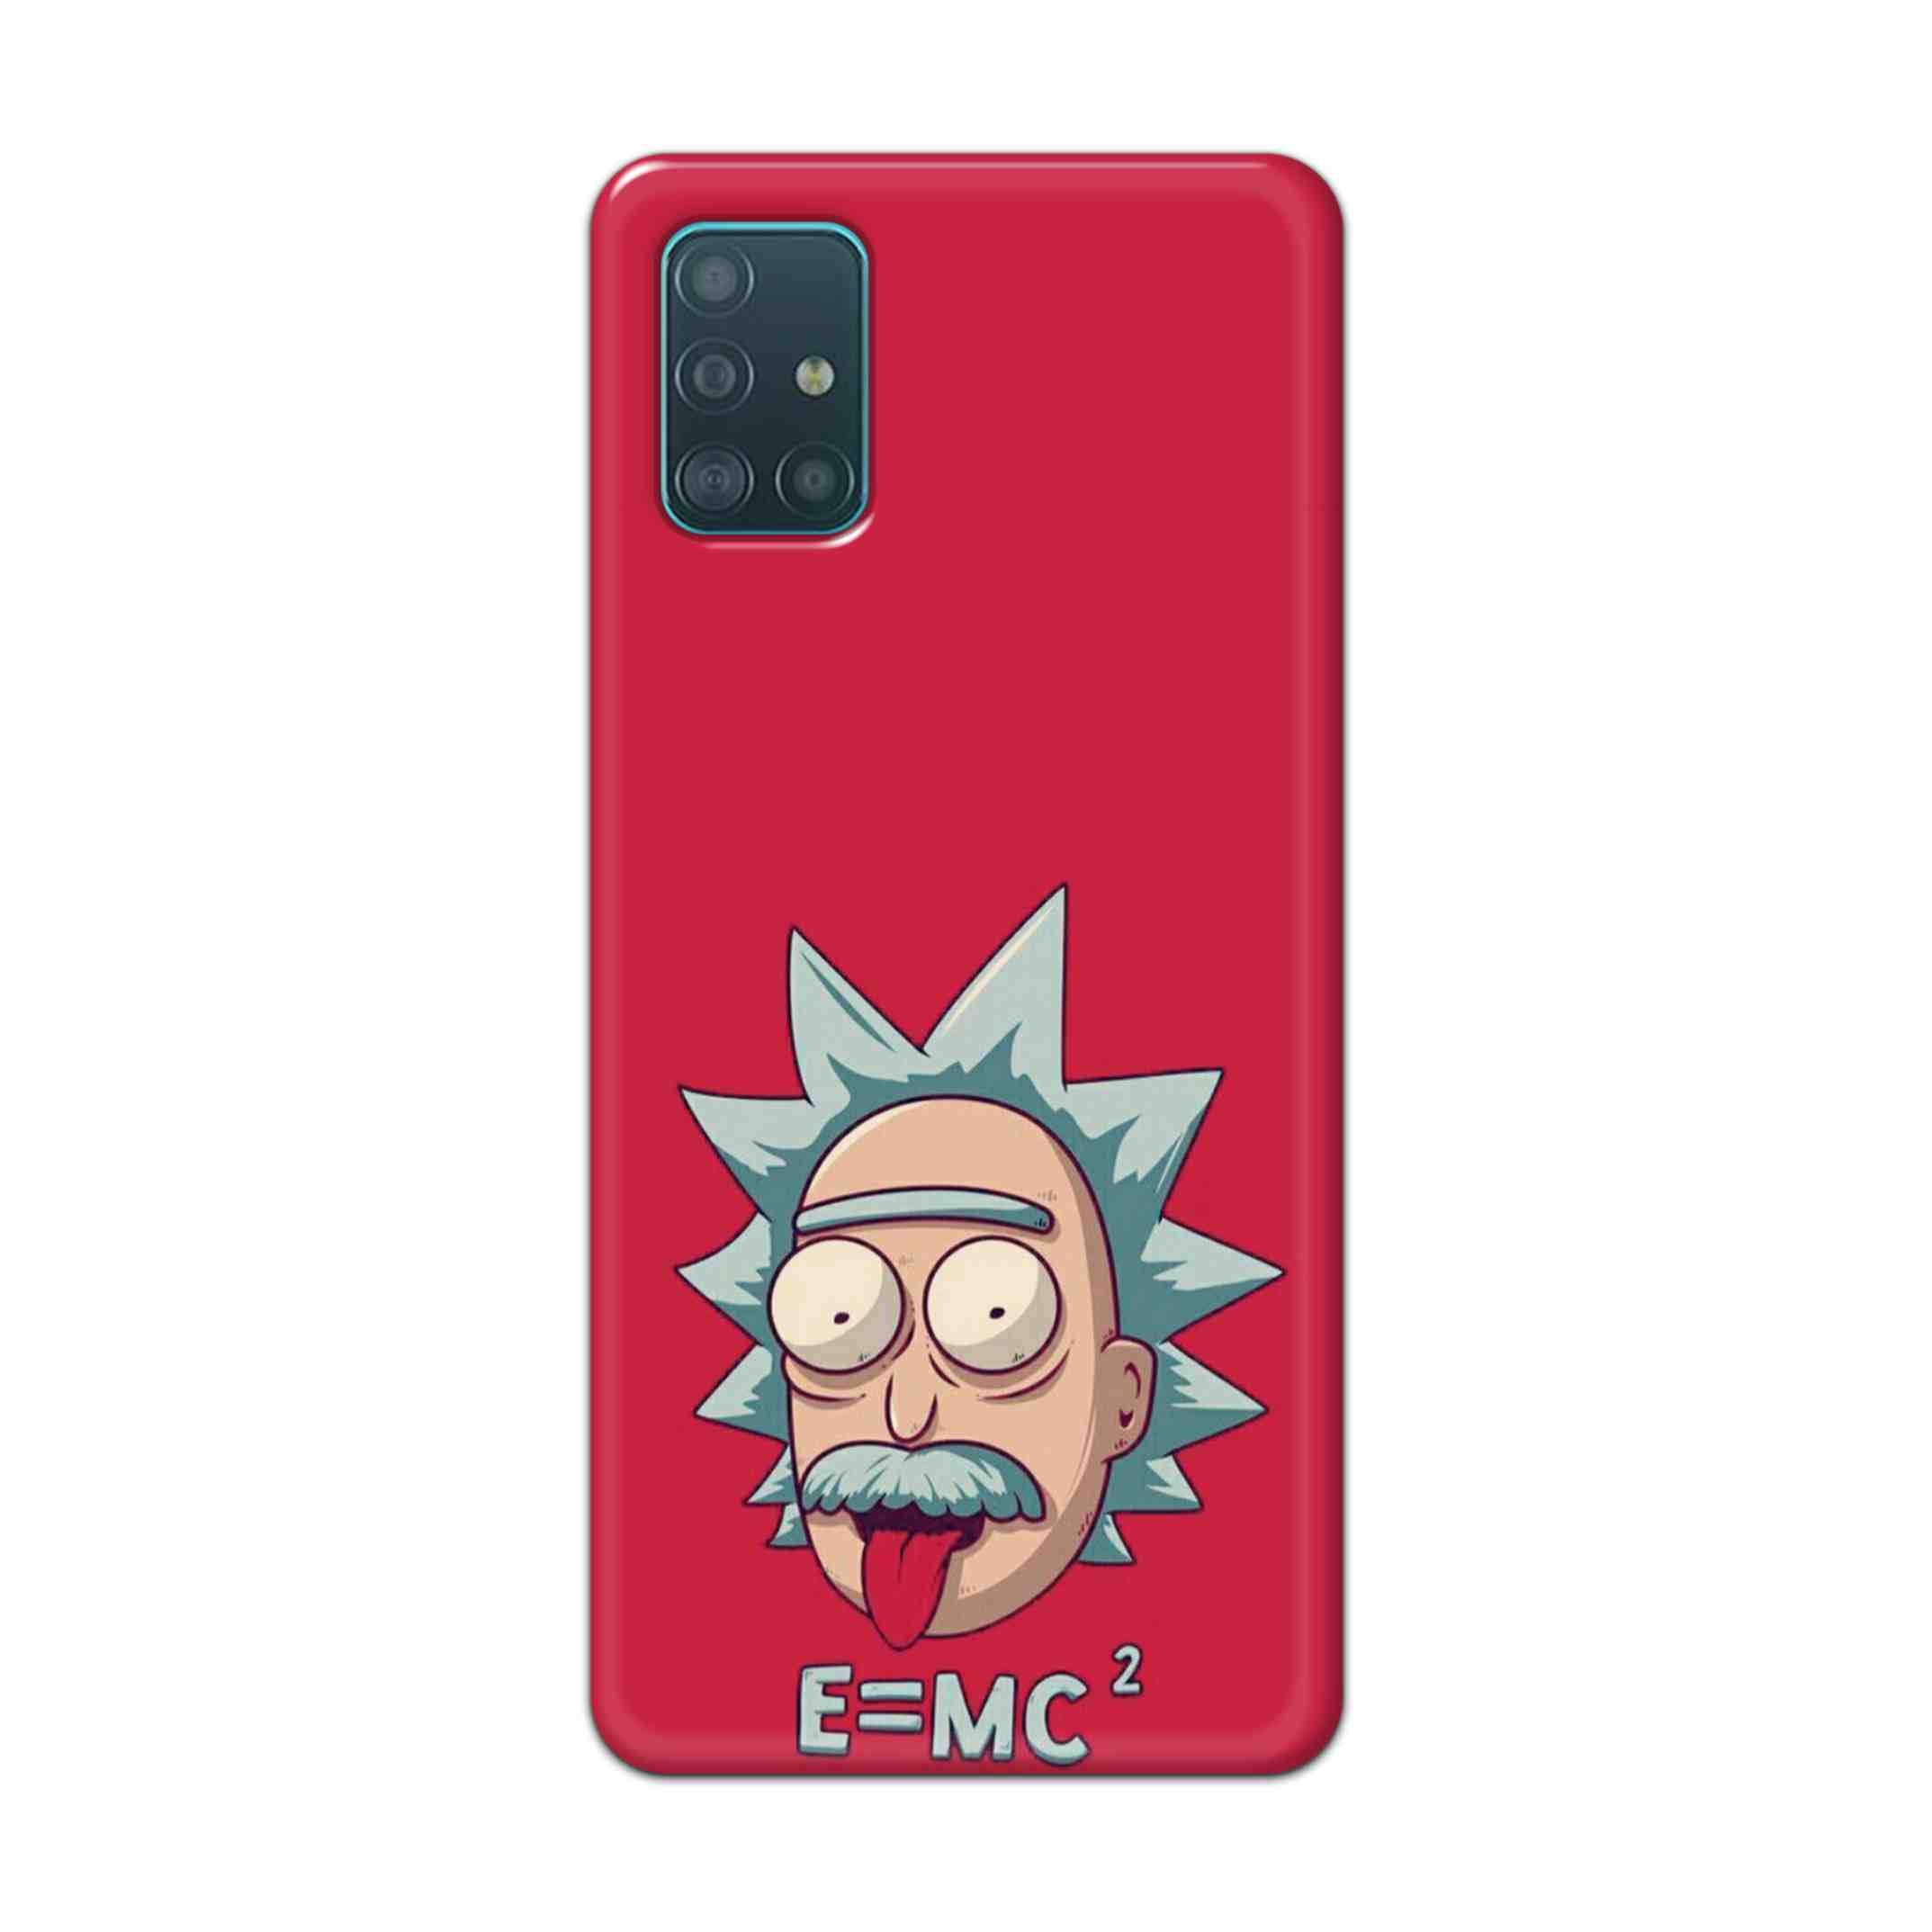 Buy E=Mc Hard Back Mobile Phone Case Cover For Samsung A51 Online